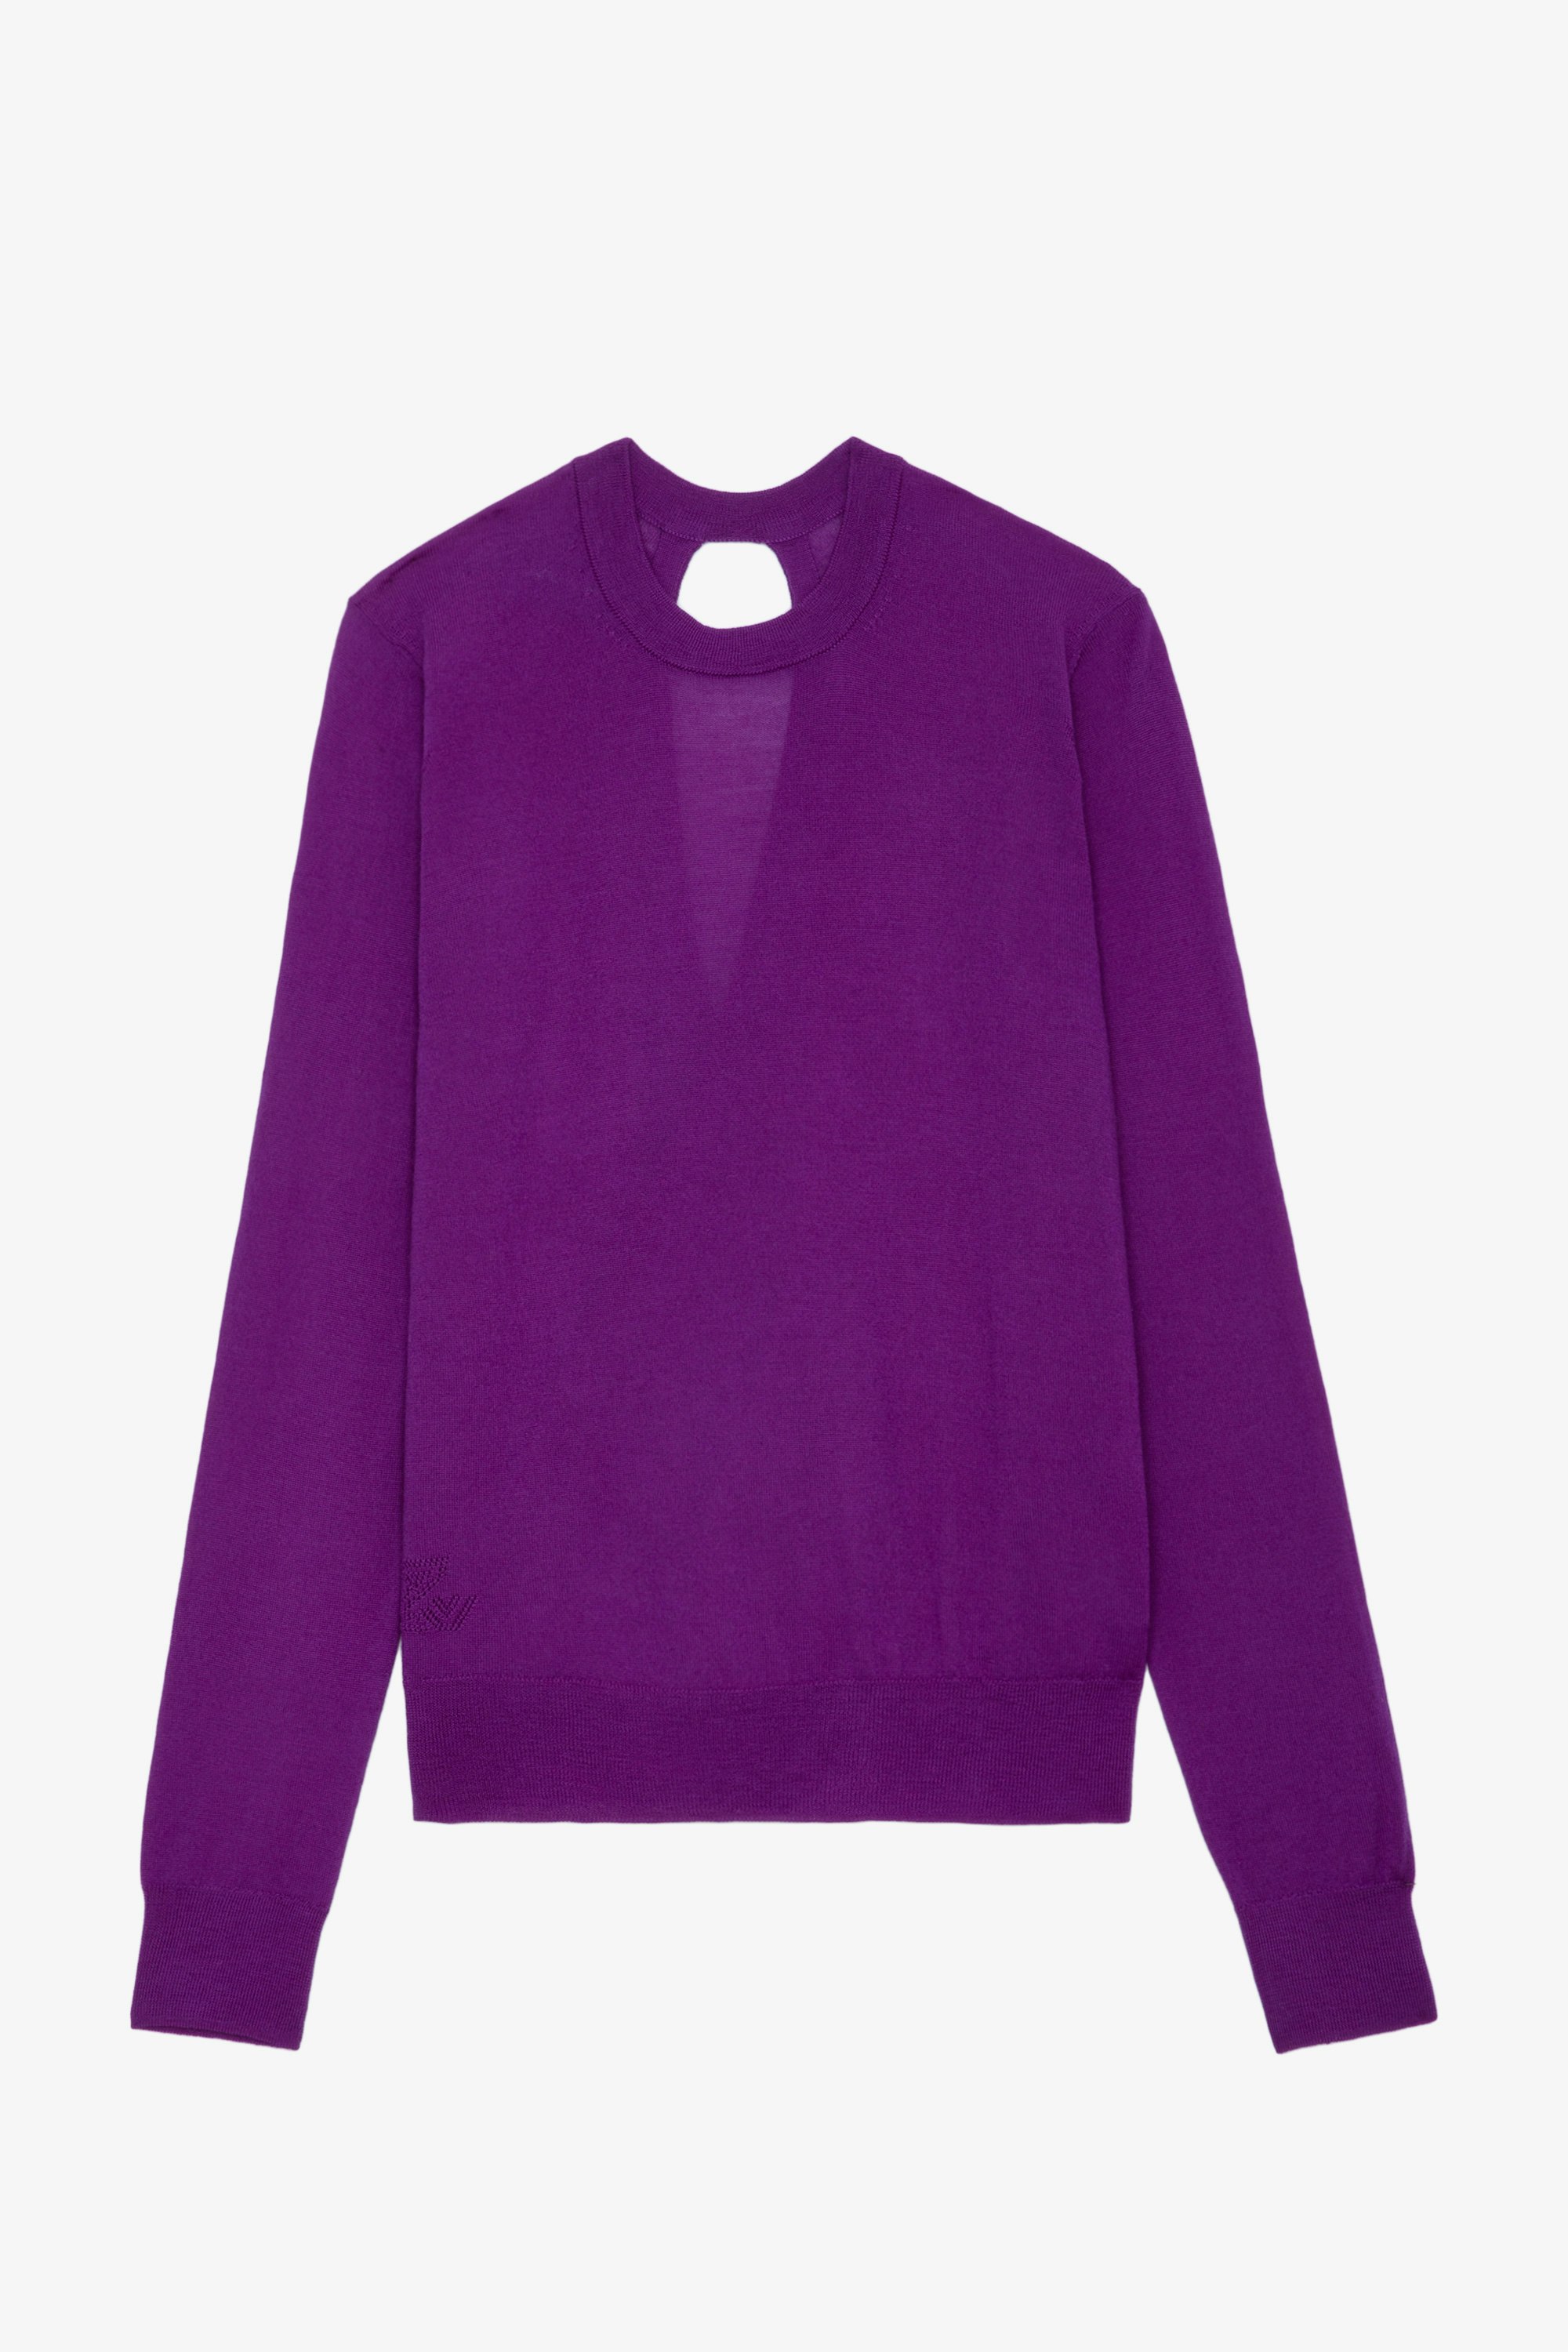 Emma Jumper - Purple merino wool round-neck jumper with long sleeves and open crossover back.